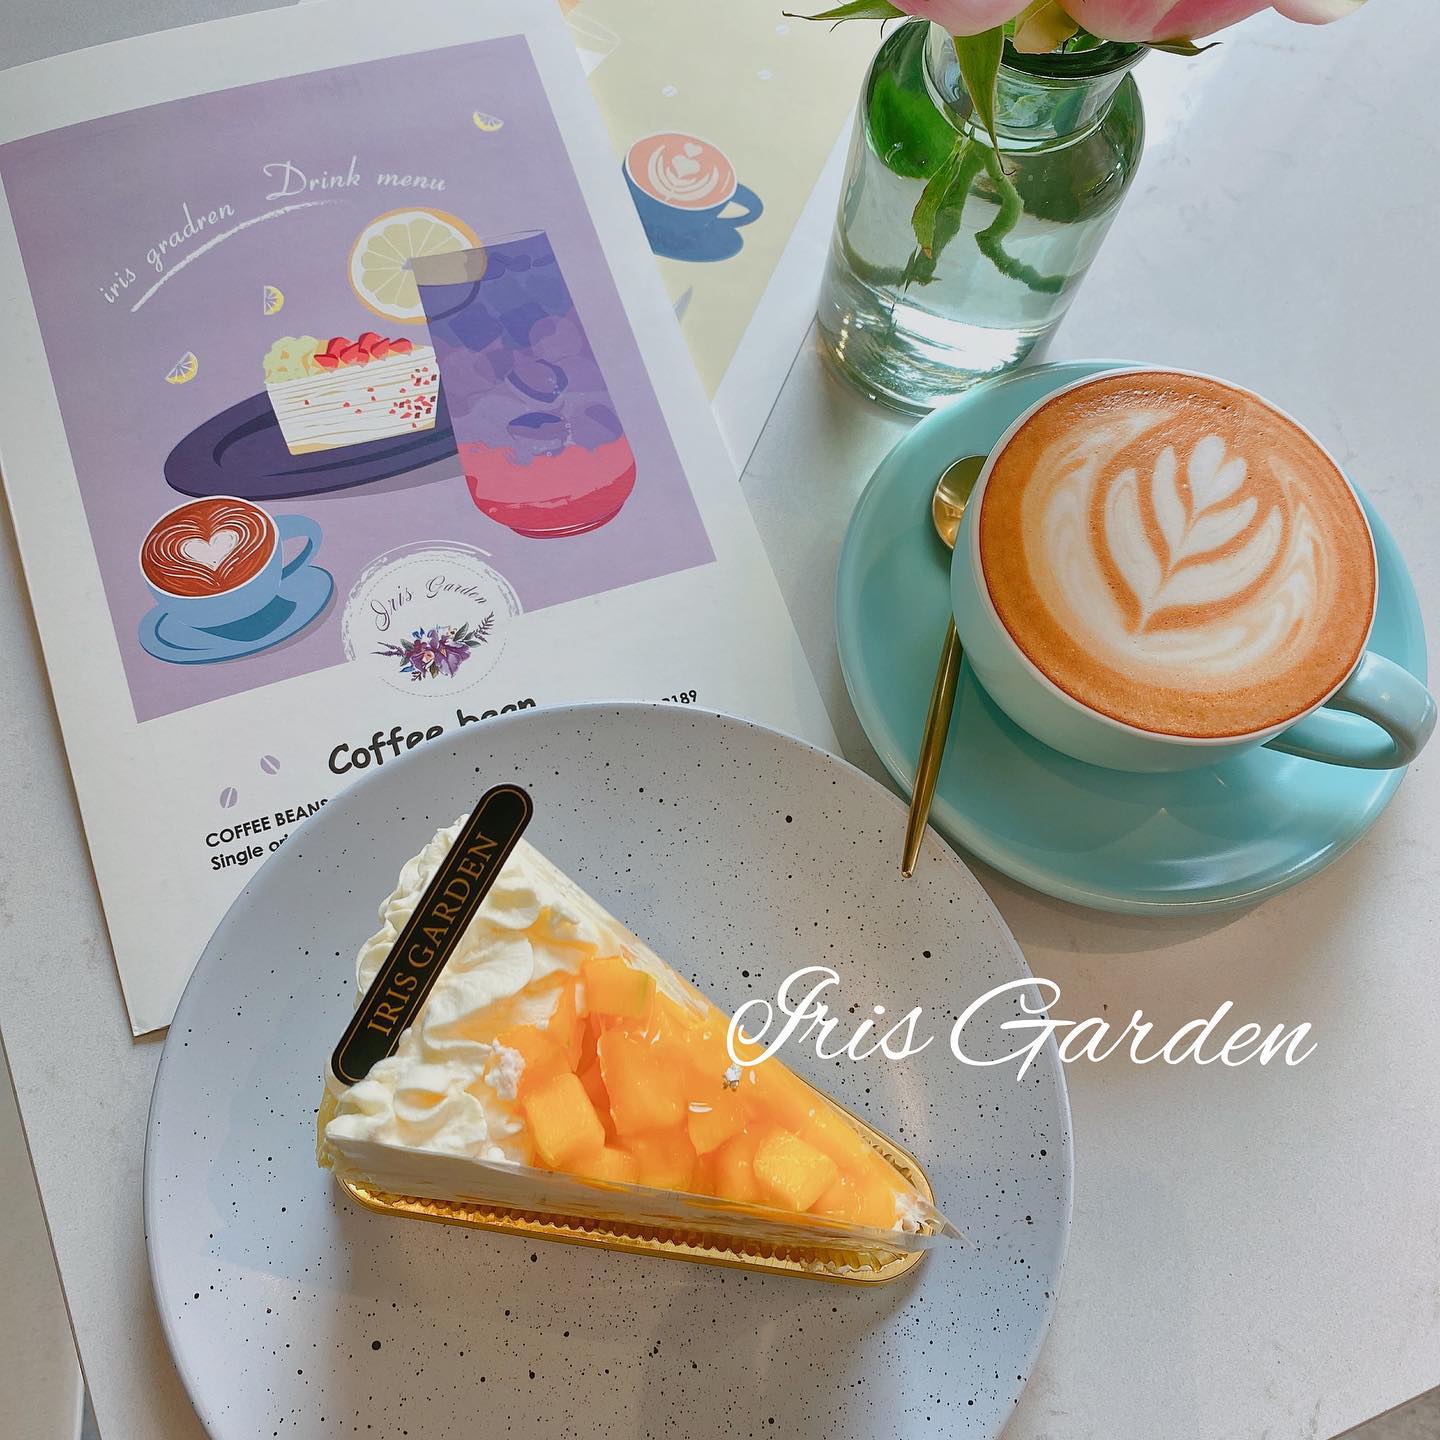 Coffee and cake from Iris Garden